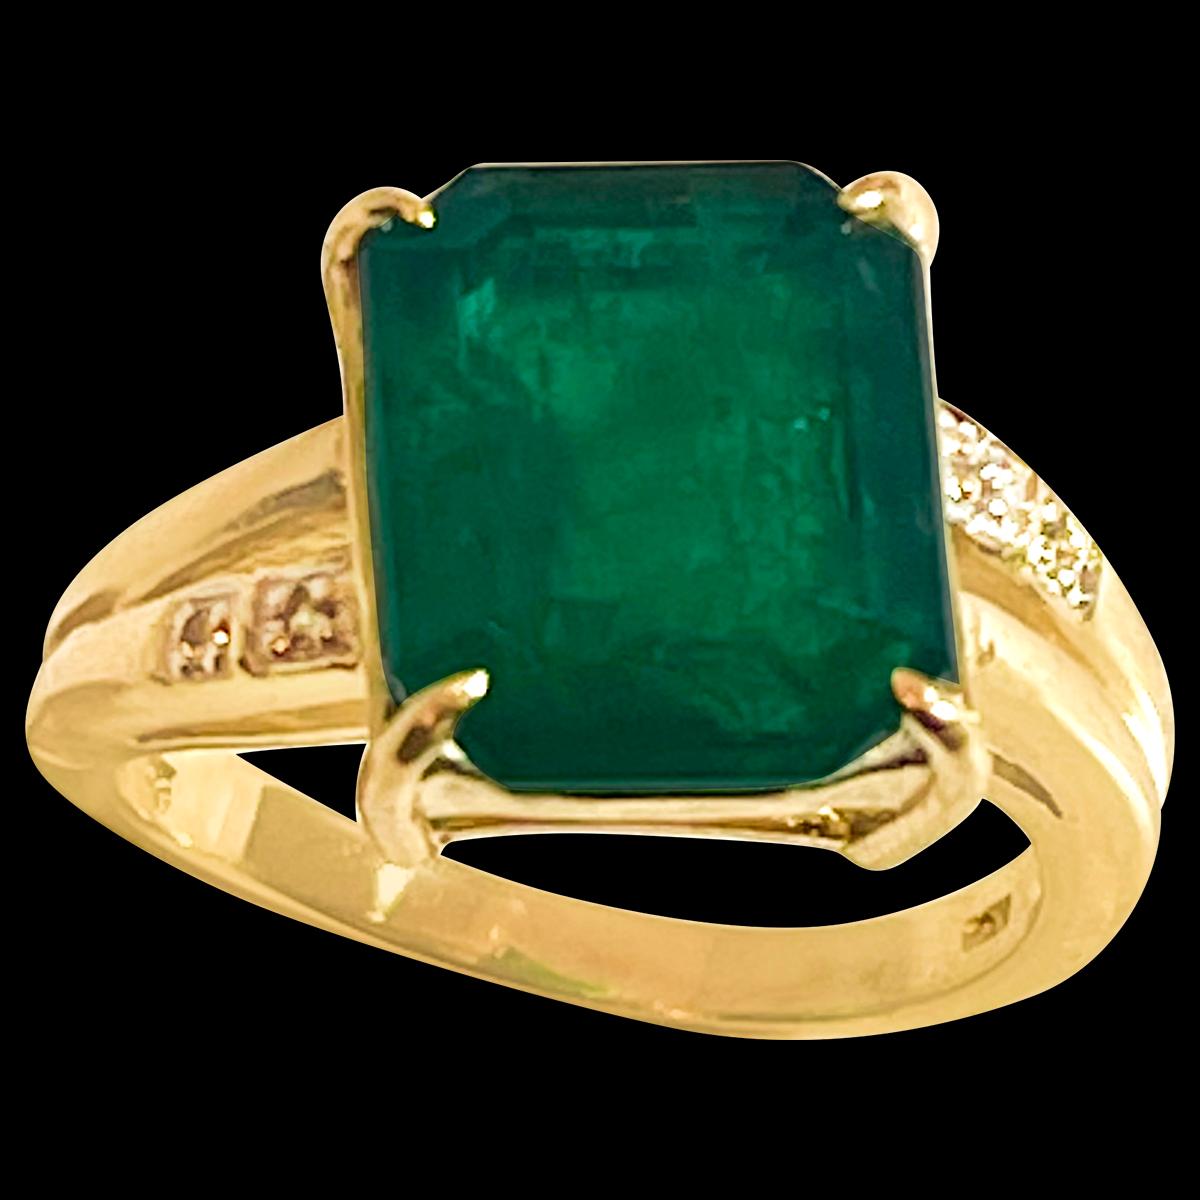 A classic, Cocktail ring 
10X12 Emerald  cut Emerald  Ring 14 Karat Yellow Gold Size 6.8
Emerald cut emerald is the most popular and in demand  Emerald 
Large size Emerald cut Emerald Intense green color with lots of shine and brilliance but has